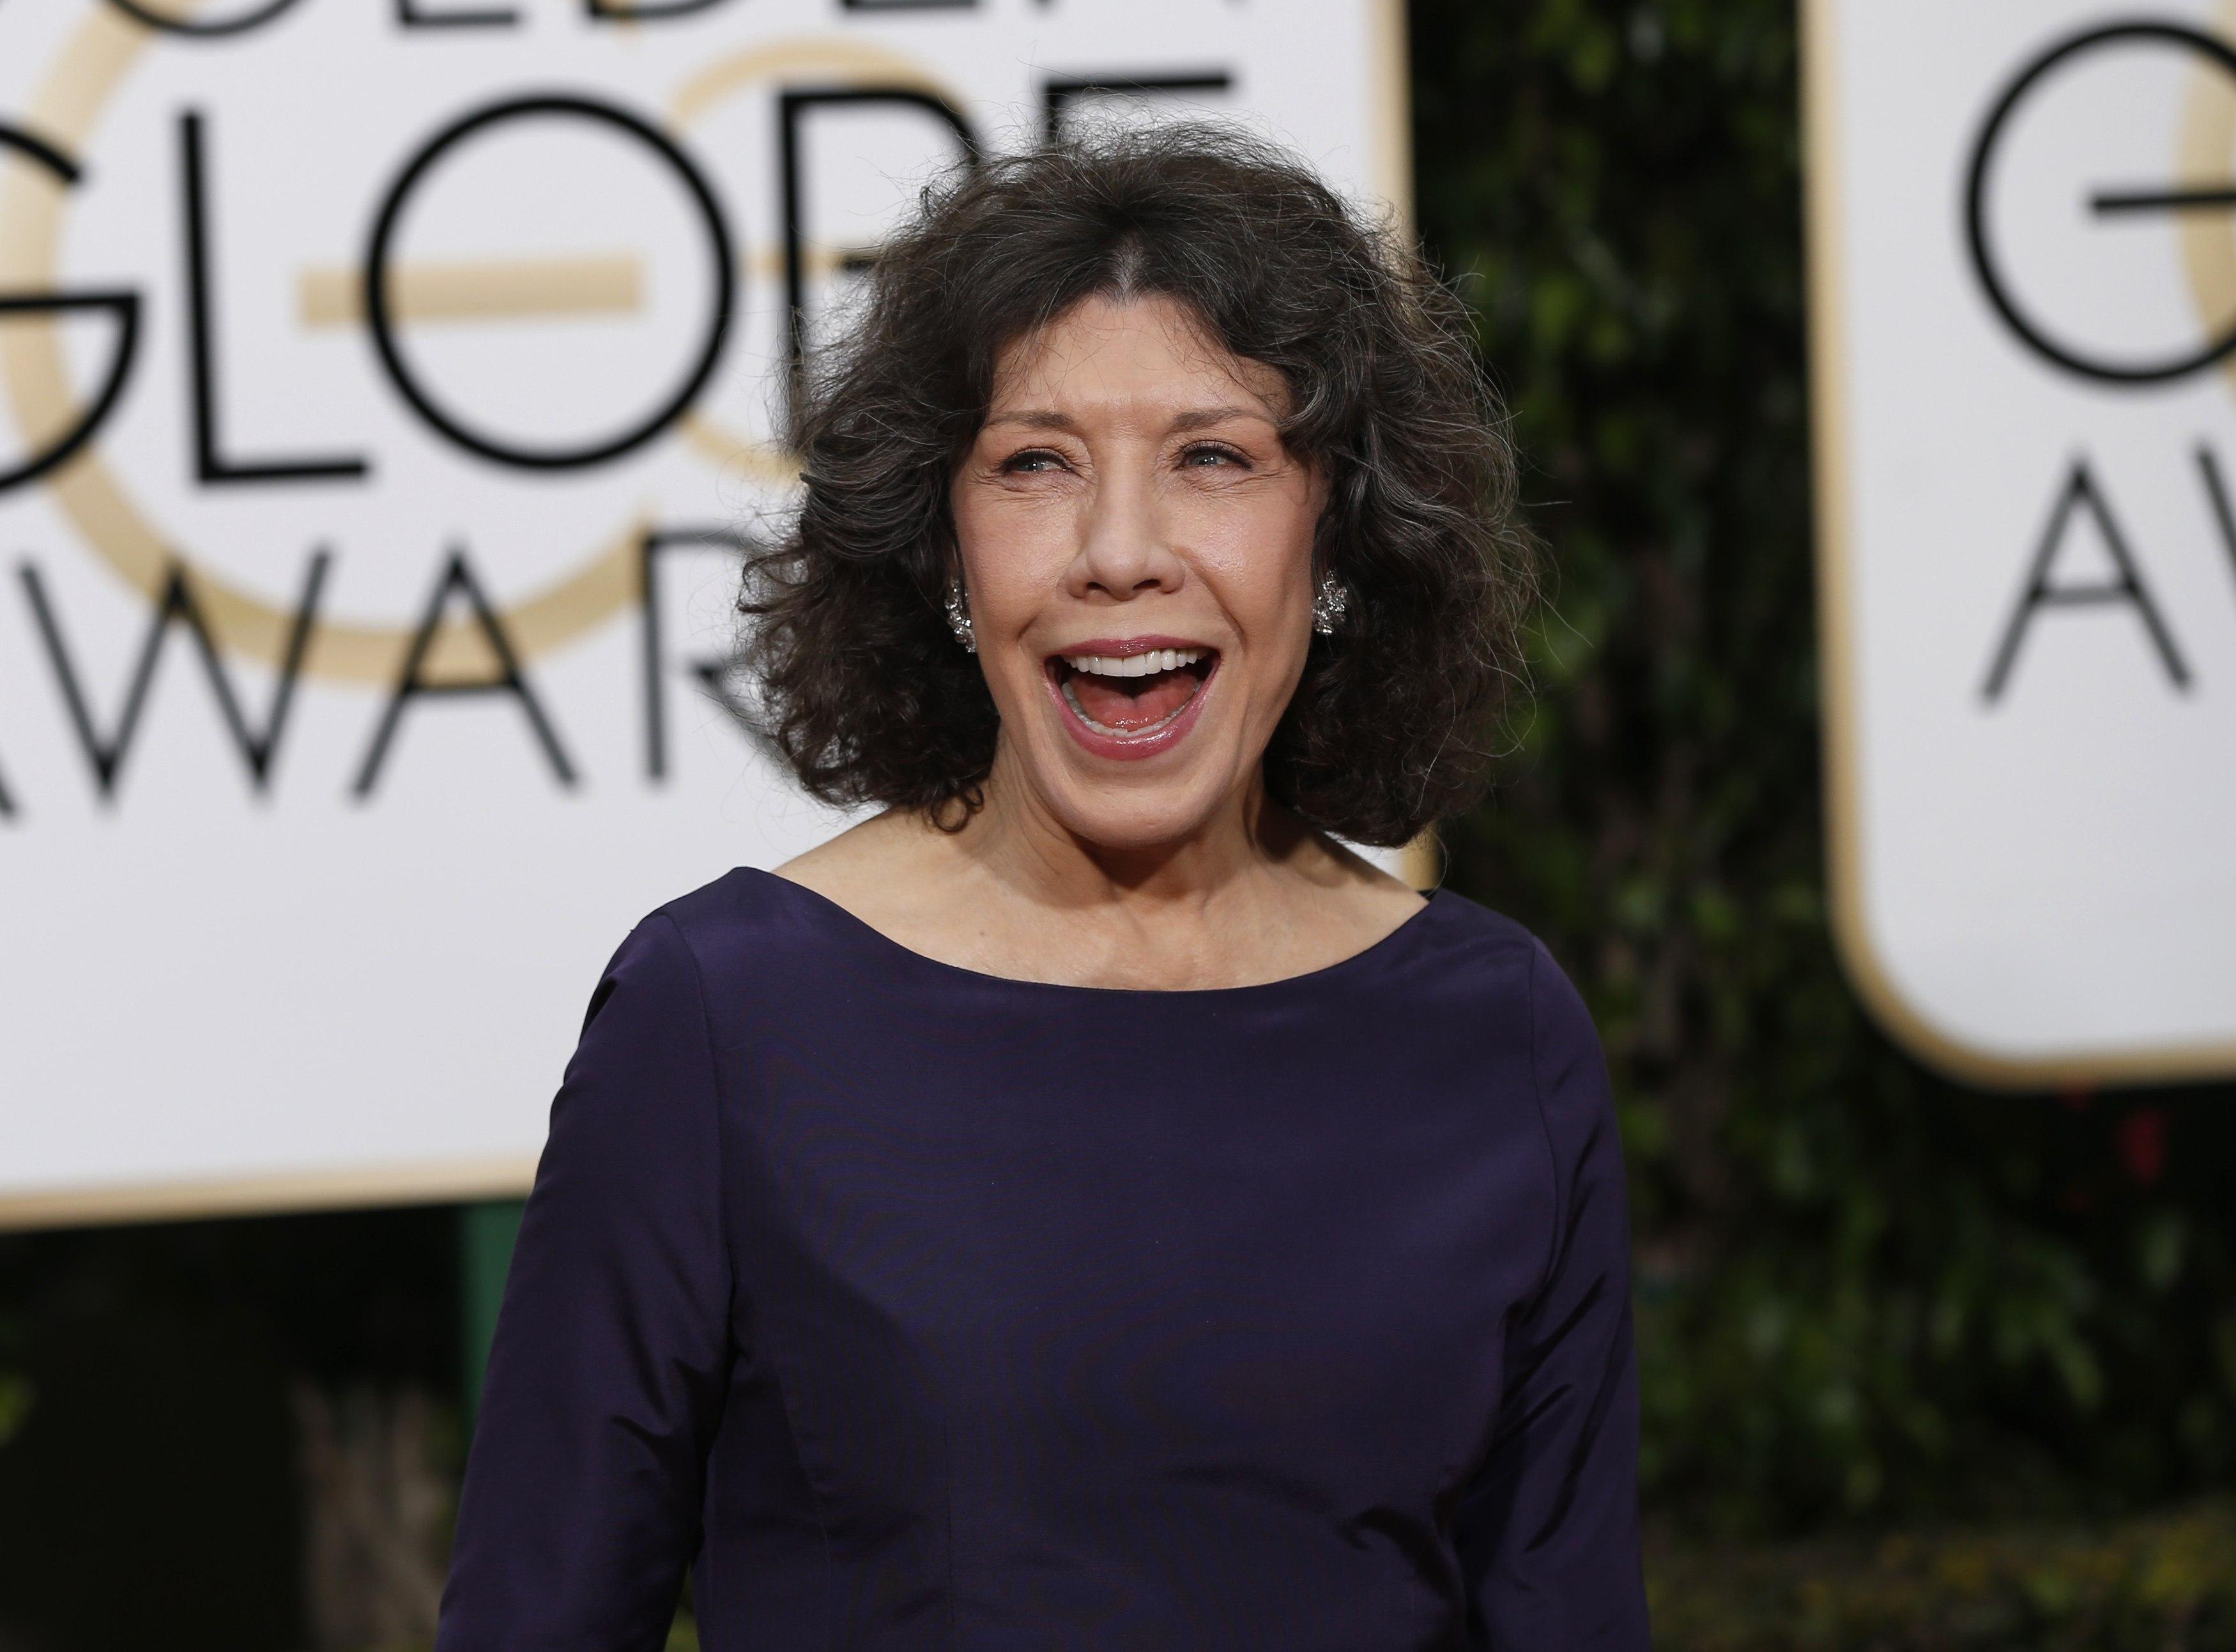 Lily Tomlin, one of America's most enduring comic actresses, will rece...